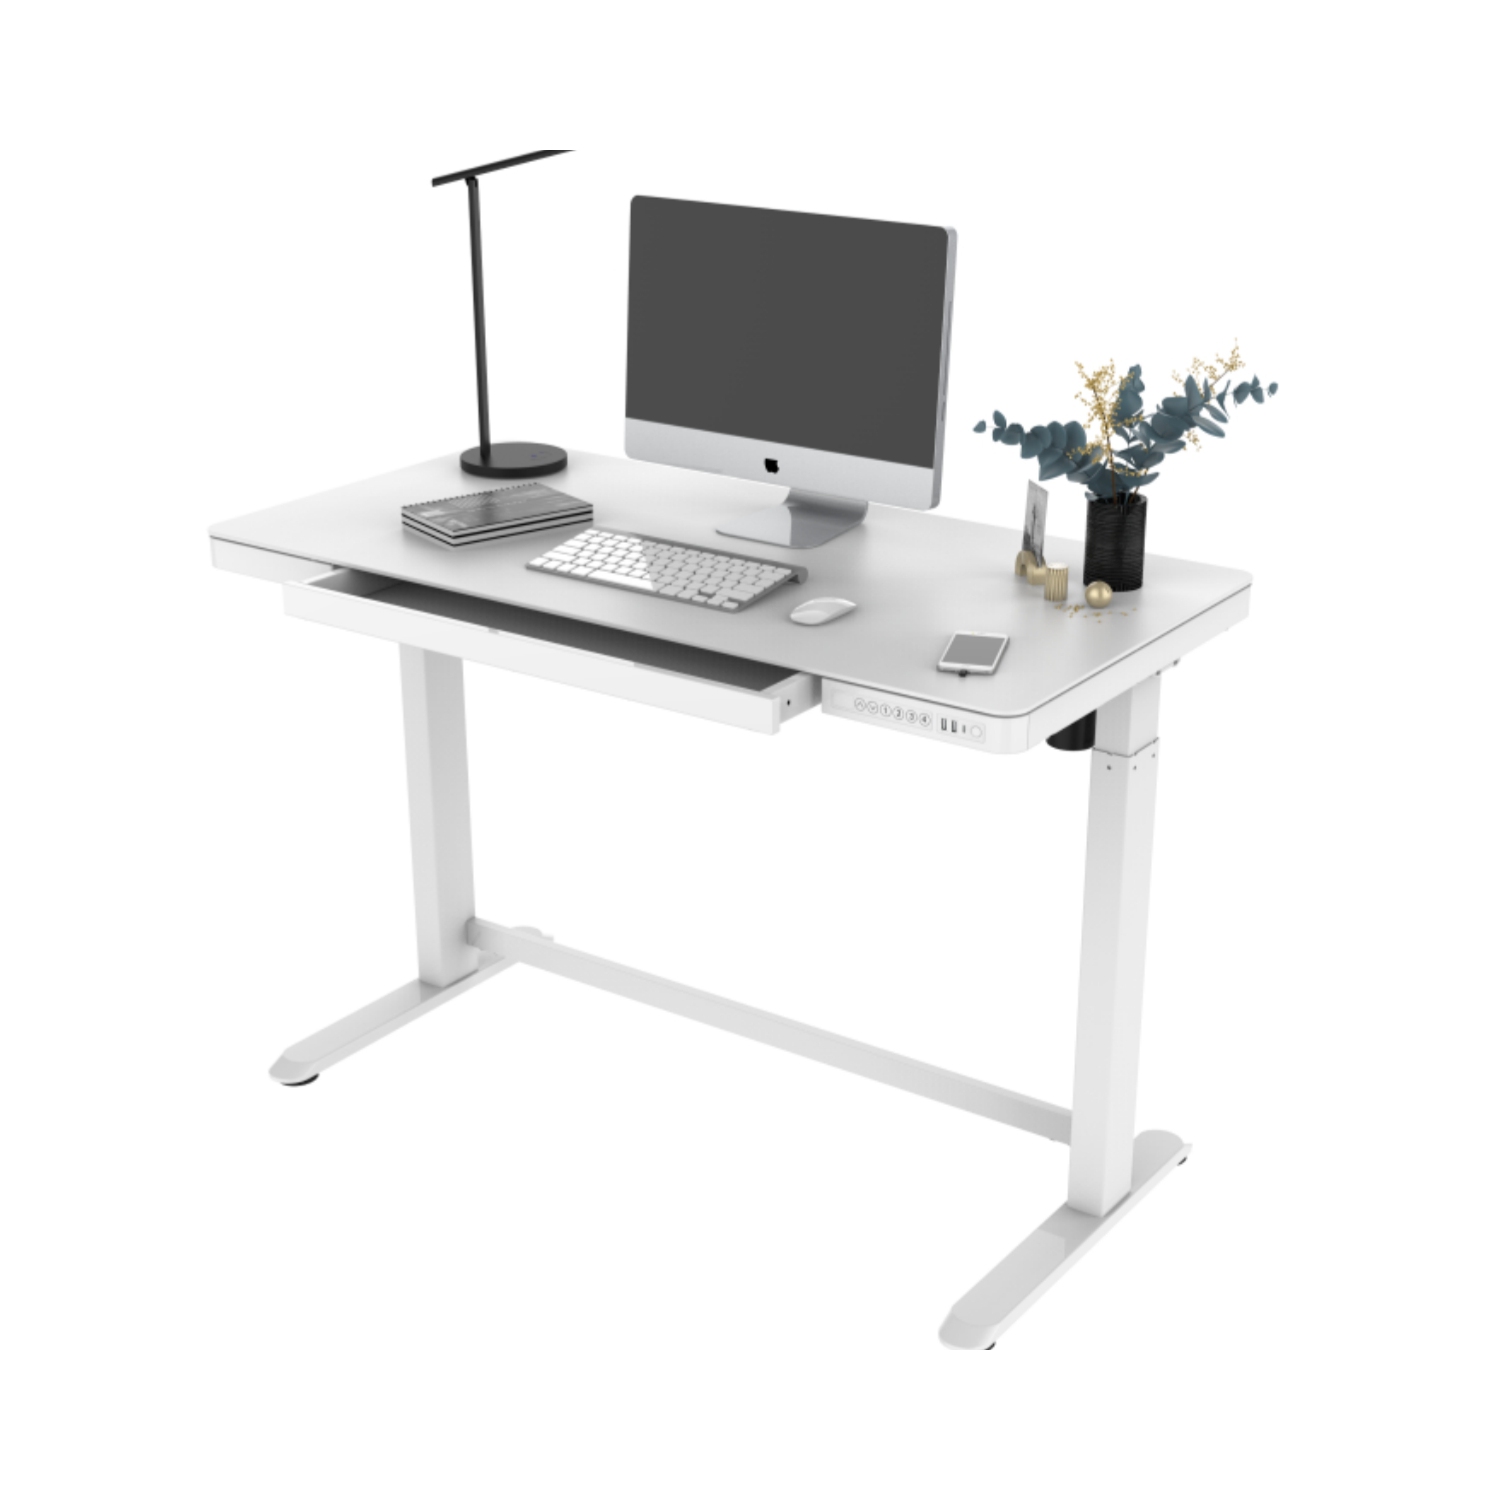 Height Adjustable Electric Standing Desk, 48 Inch All-in-One Sit Stand Desk Workstation with Drawer, USB Charging Port and Glass Tabletop (White)